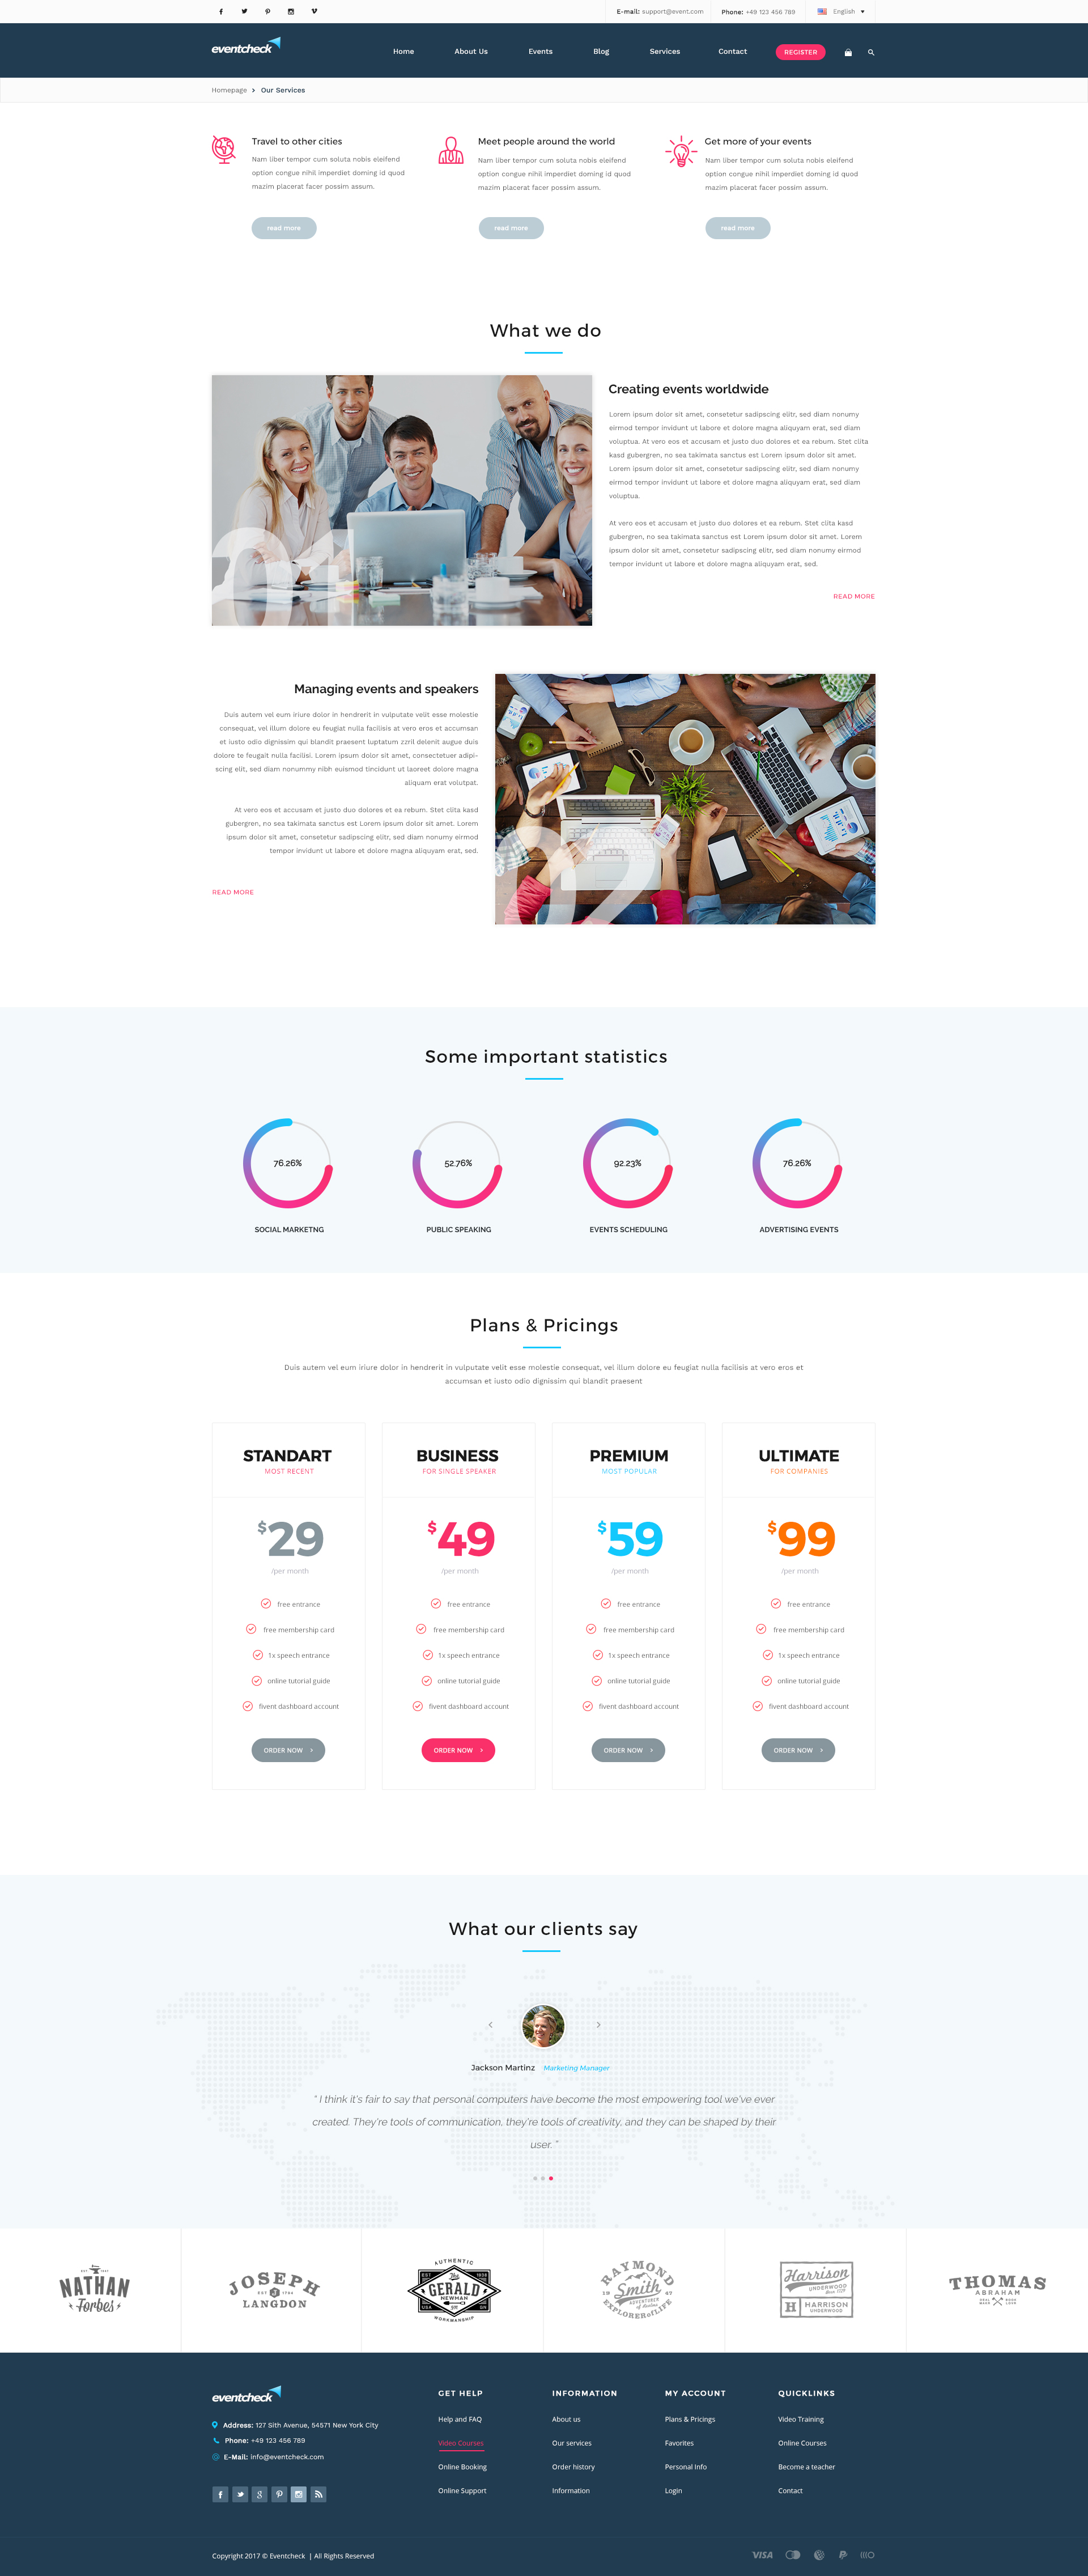 Eventcheck - Meeting, Conference & Event PSD template